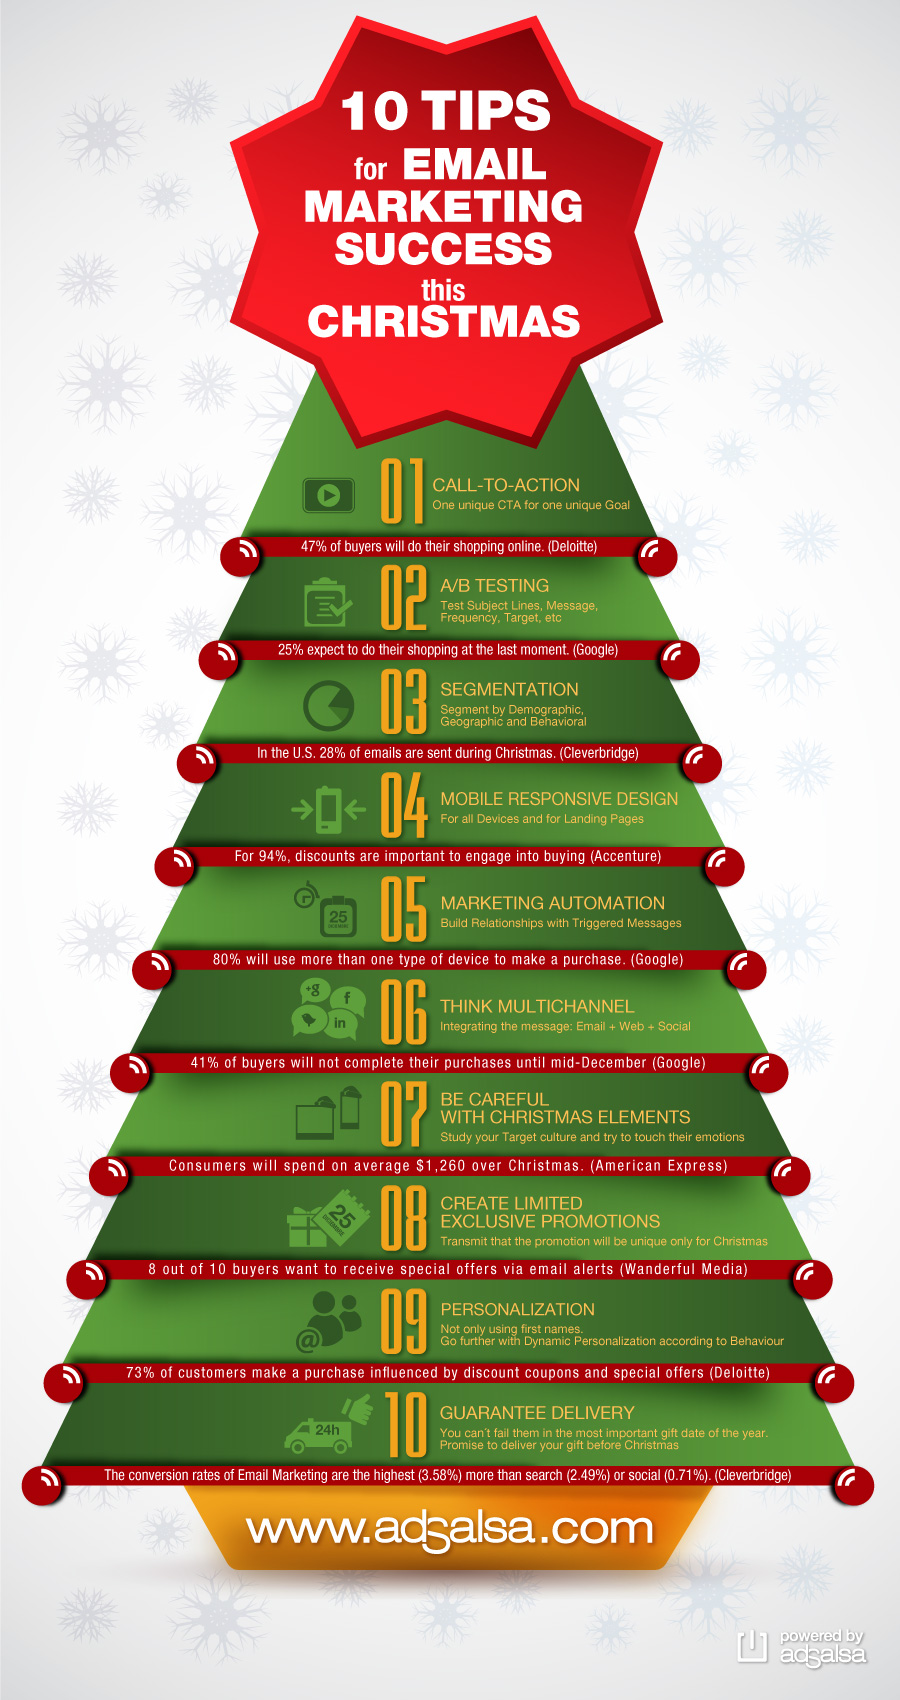 inphographic-10-tips-email-marketing-christmas-blog-acens-cloud